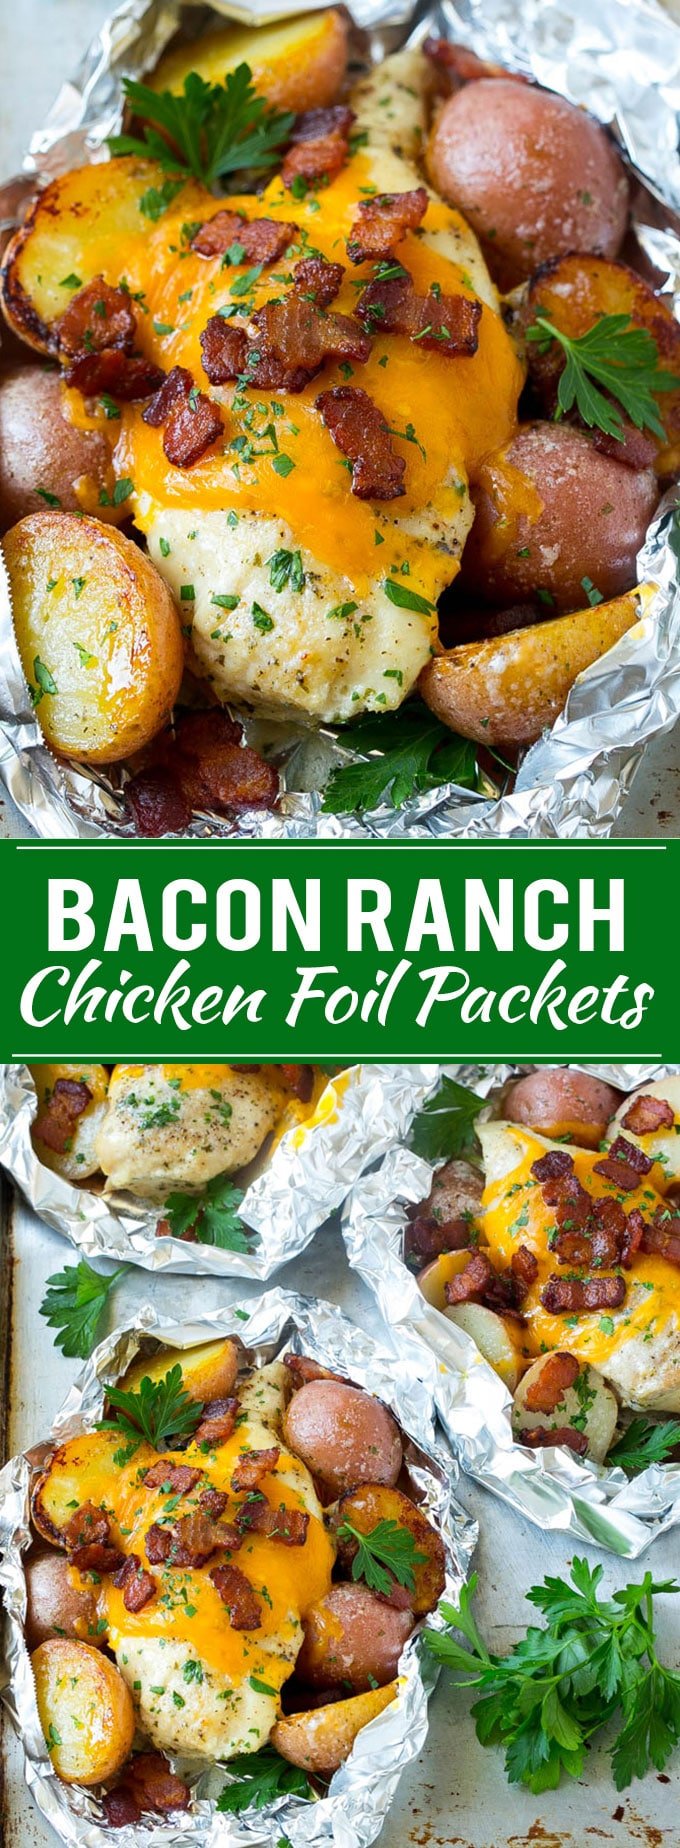 Bacon Ranch Chicken Foil Packets | Chicken in Foil | Foil Packet Recipe | Ranch Chicken #ranchchicken #grilling #chicken #foilpacket #foilpackets #bacon #dinner #dinneratthezoo